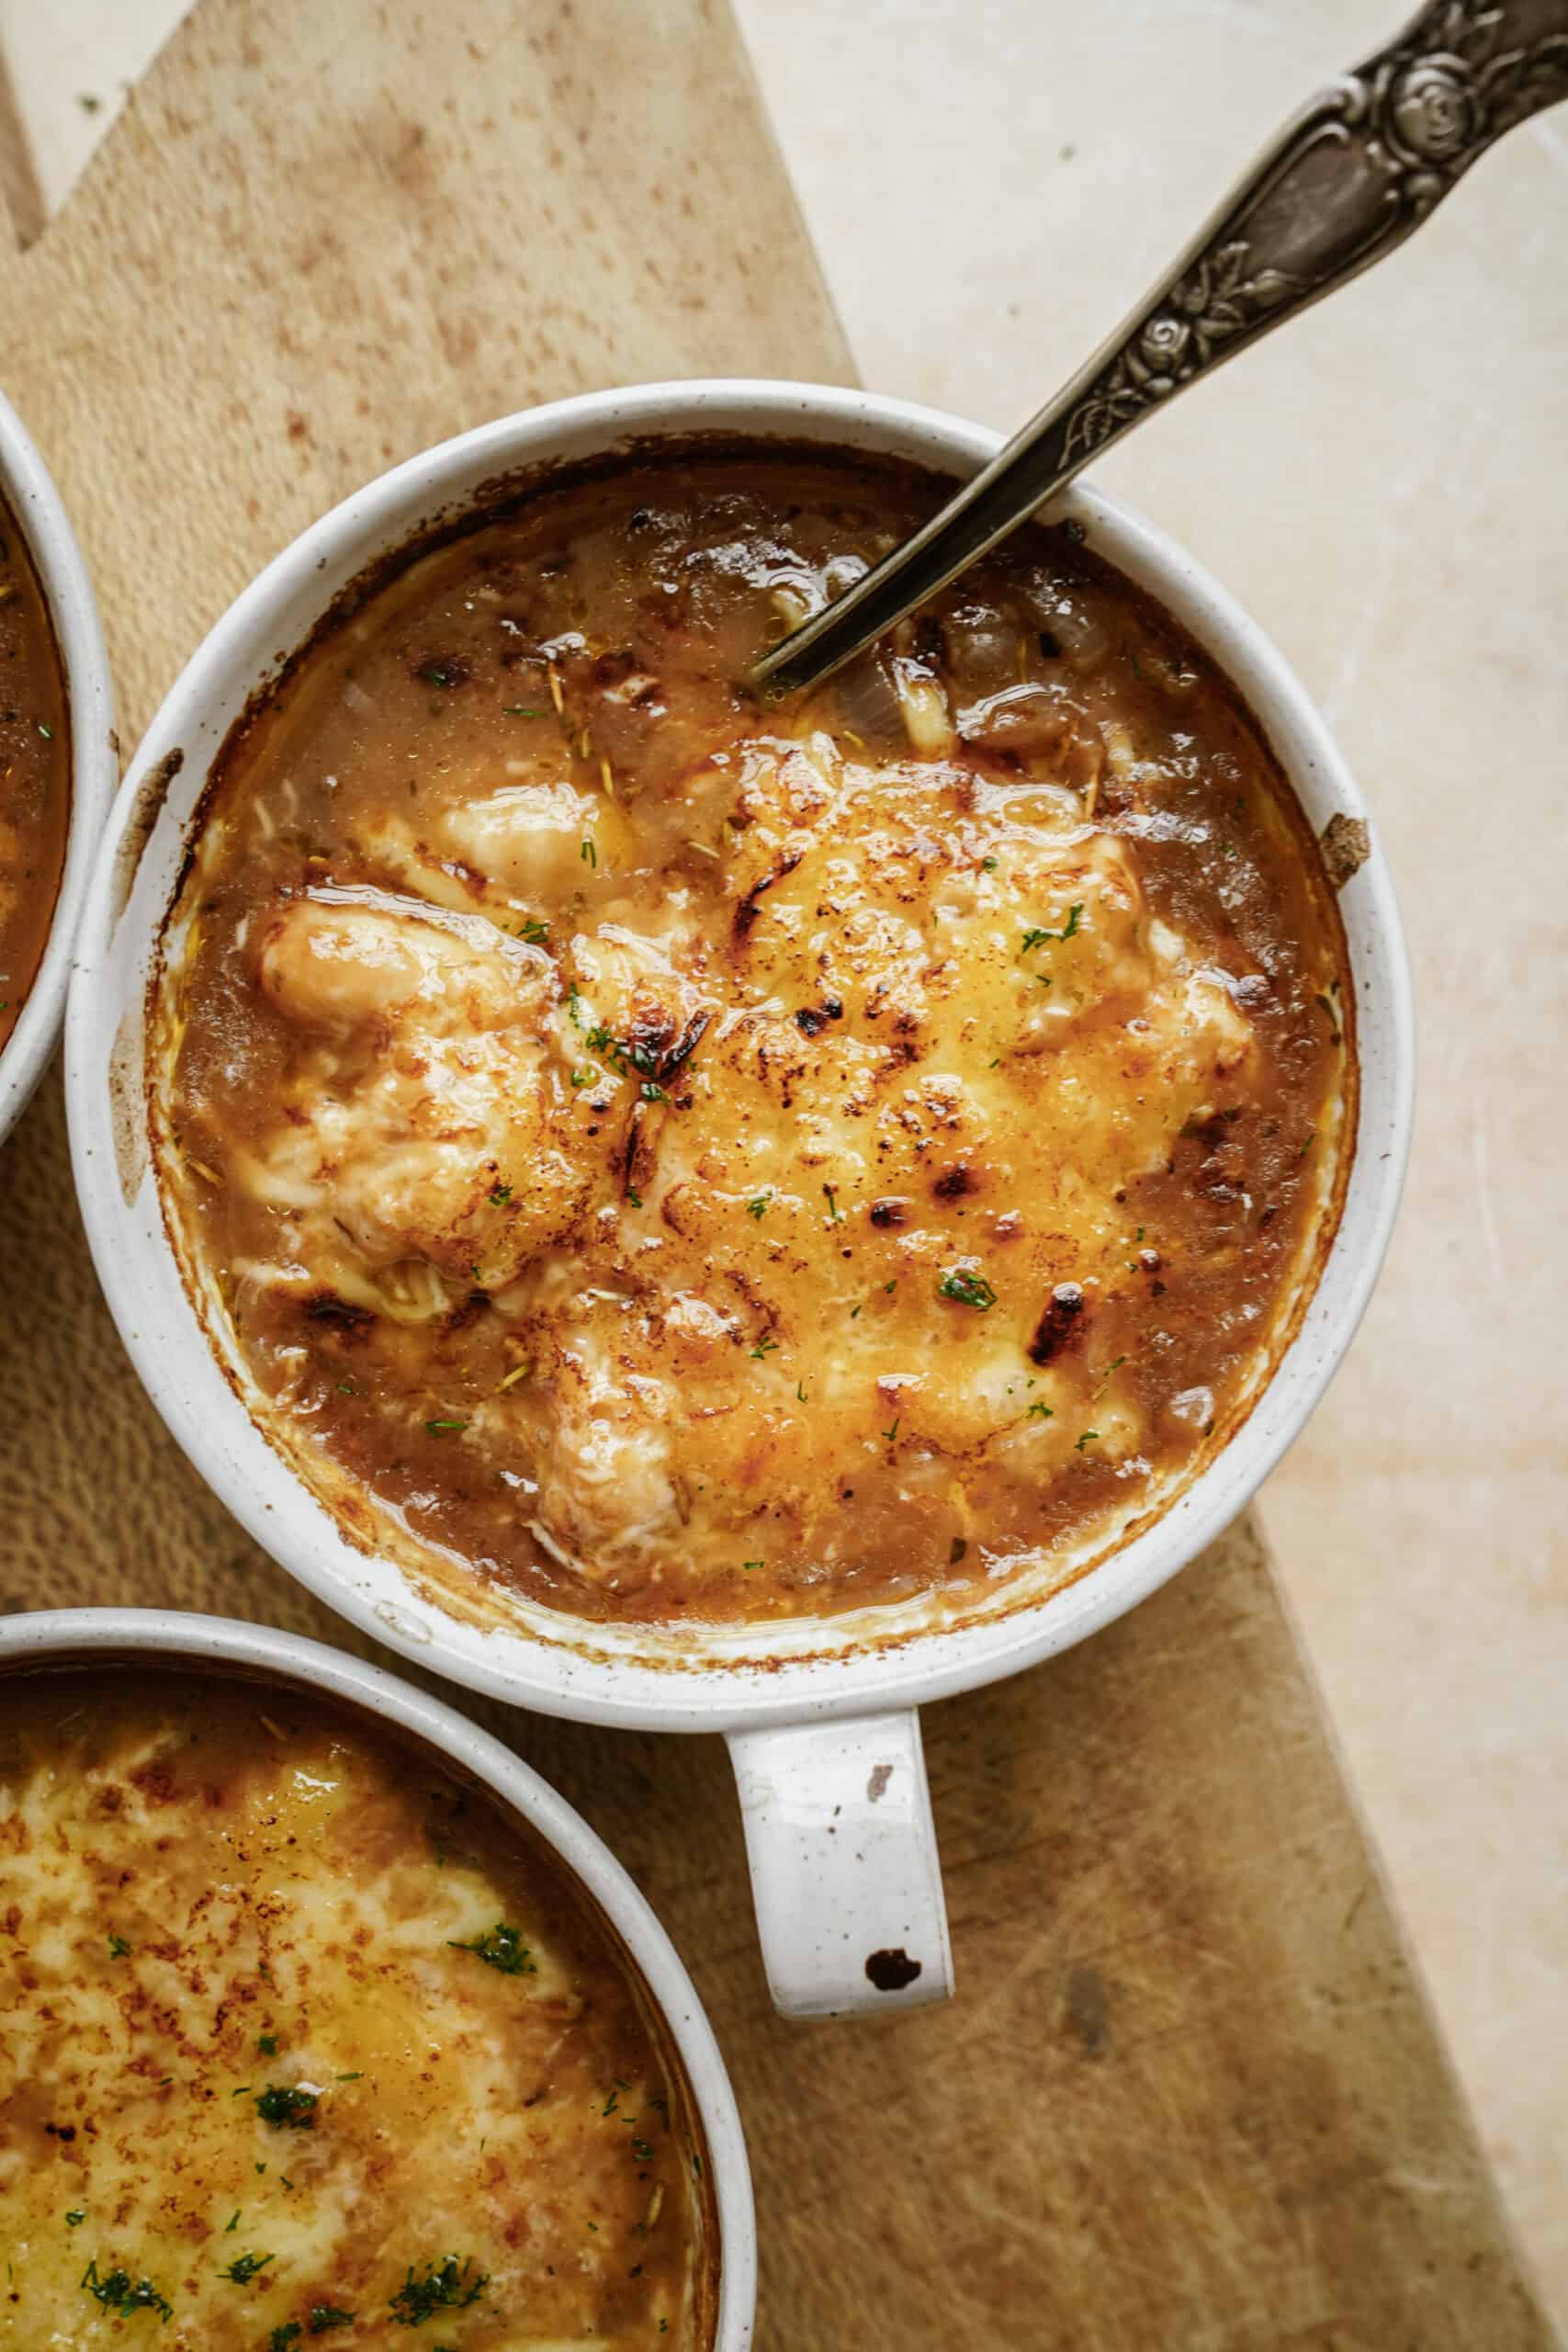 Baked French Onion Soup with Melted Cheese